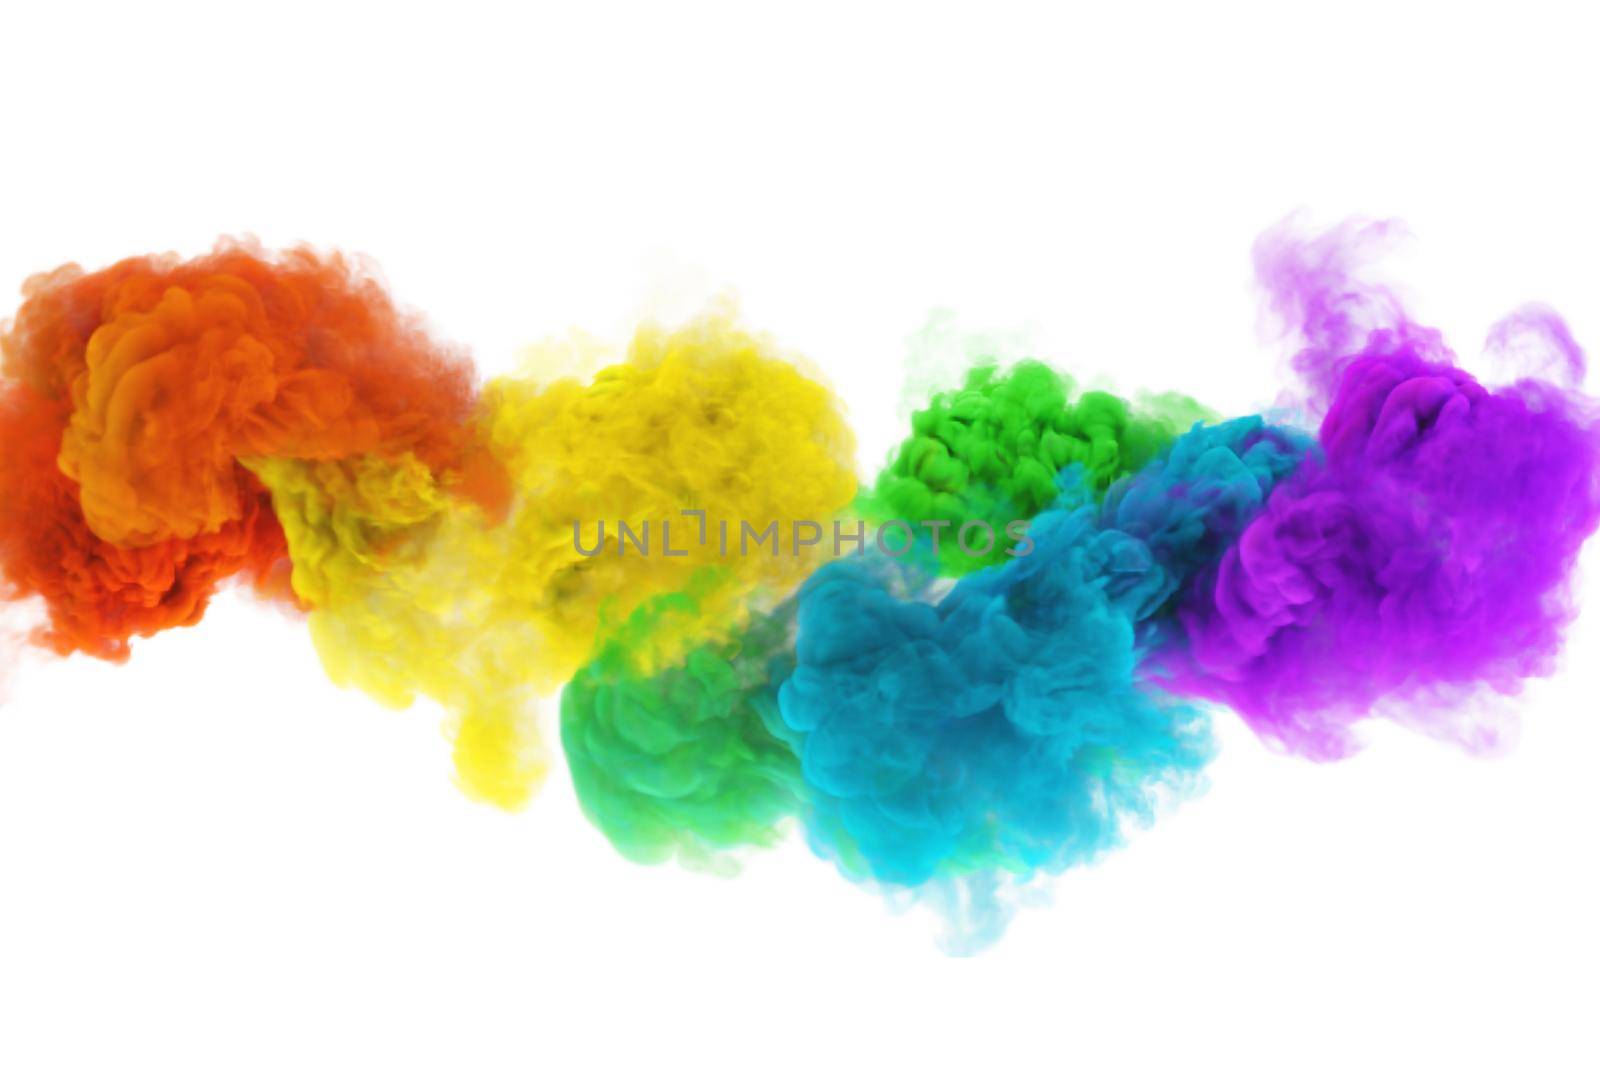 Funny clouds of colored rainbow smoke in white background by Xeniasnowstorm